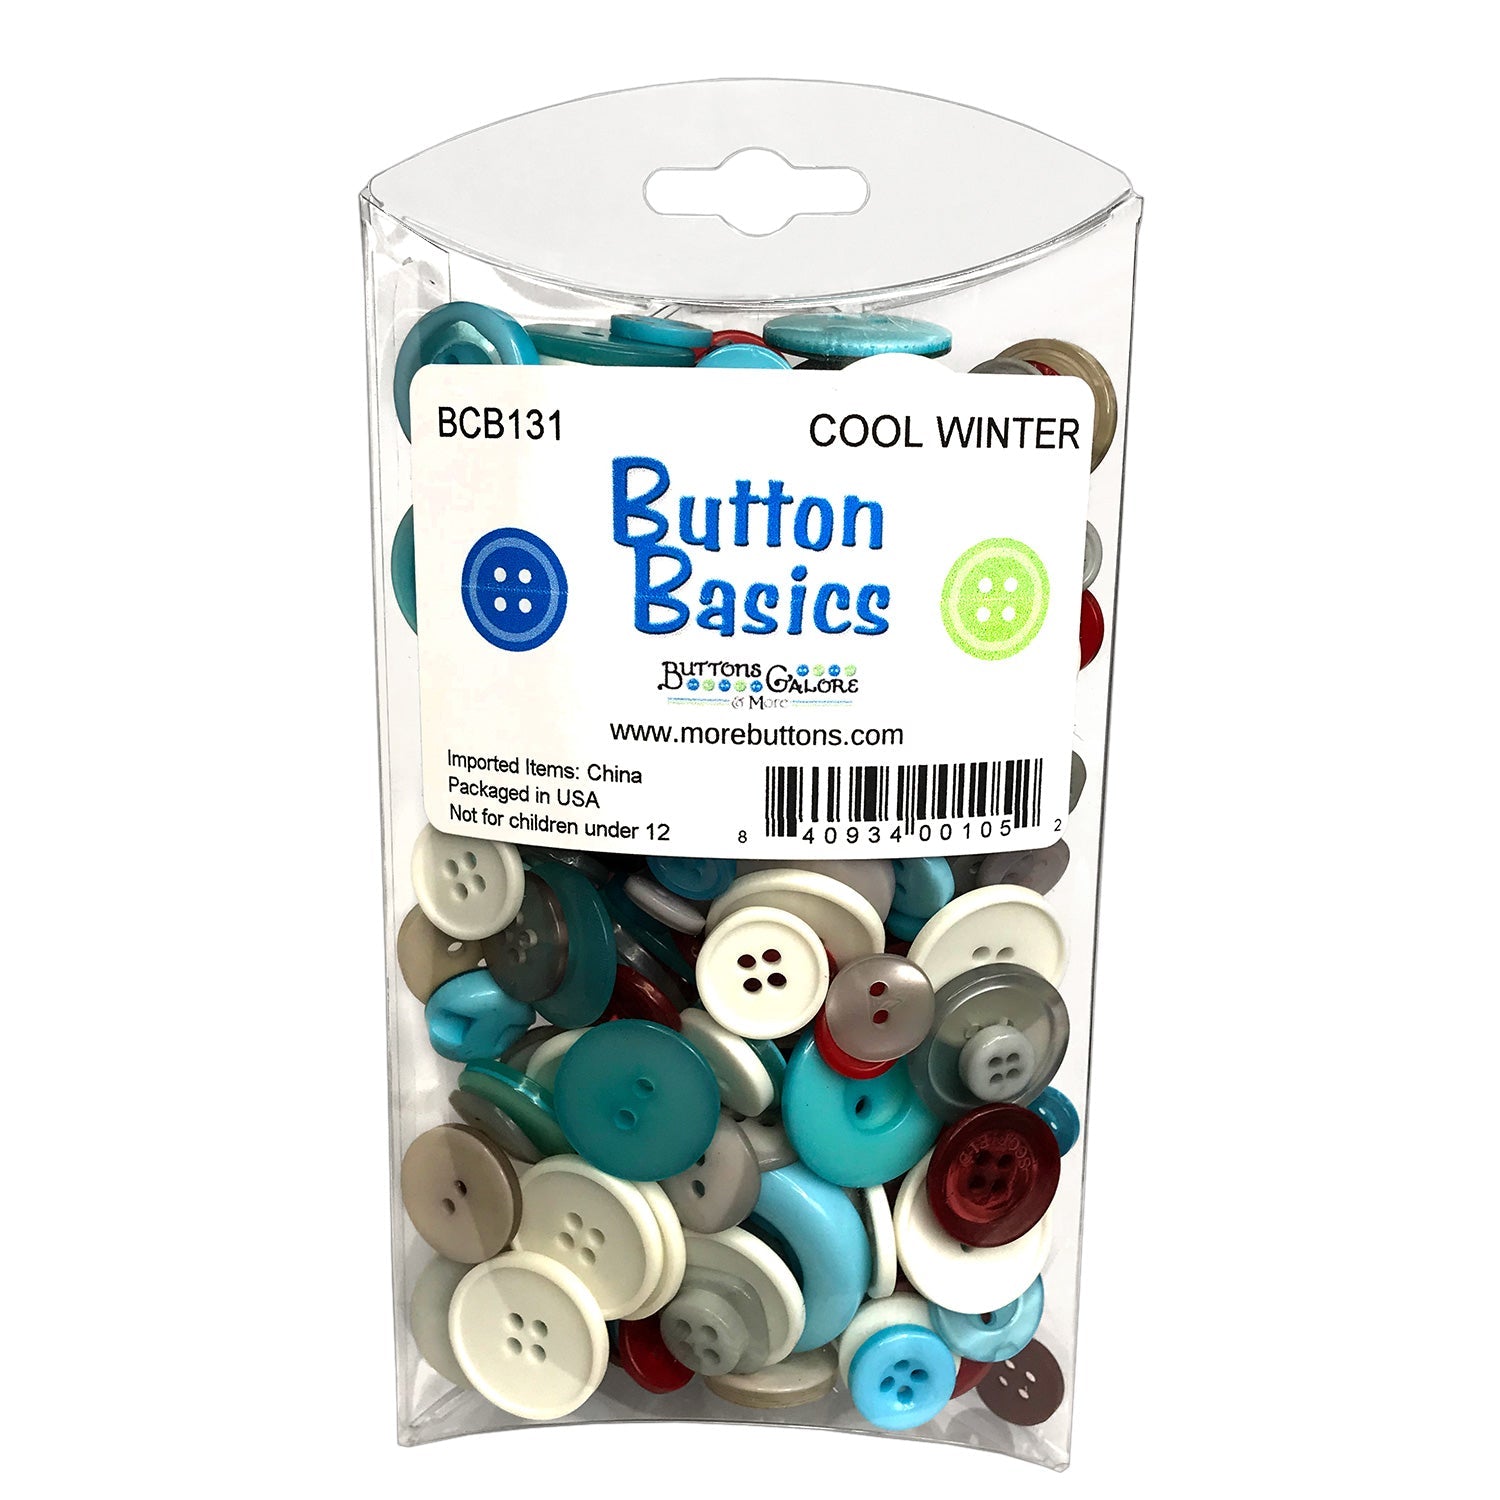 Cool Winter - Buttons Galore and More